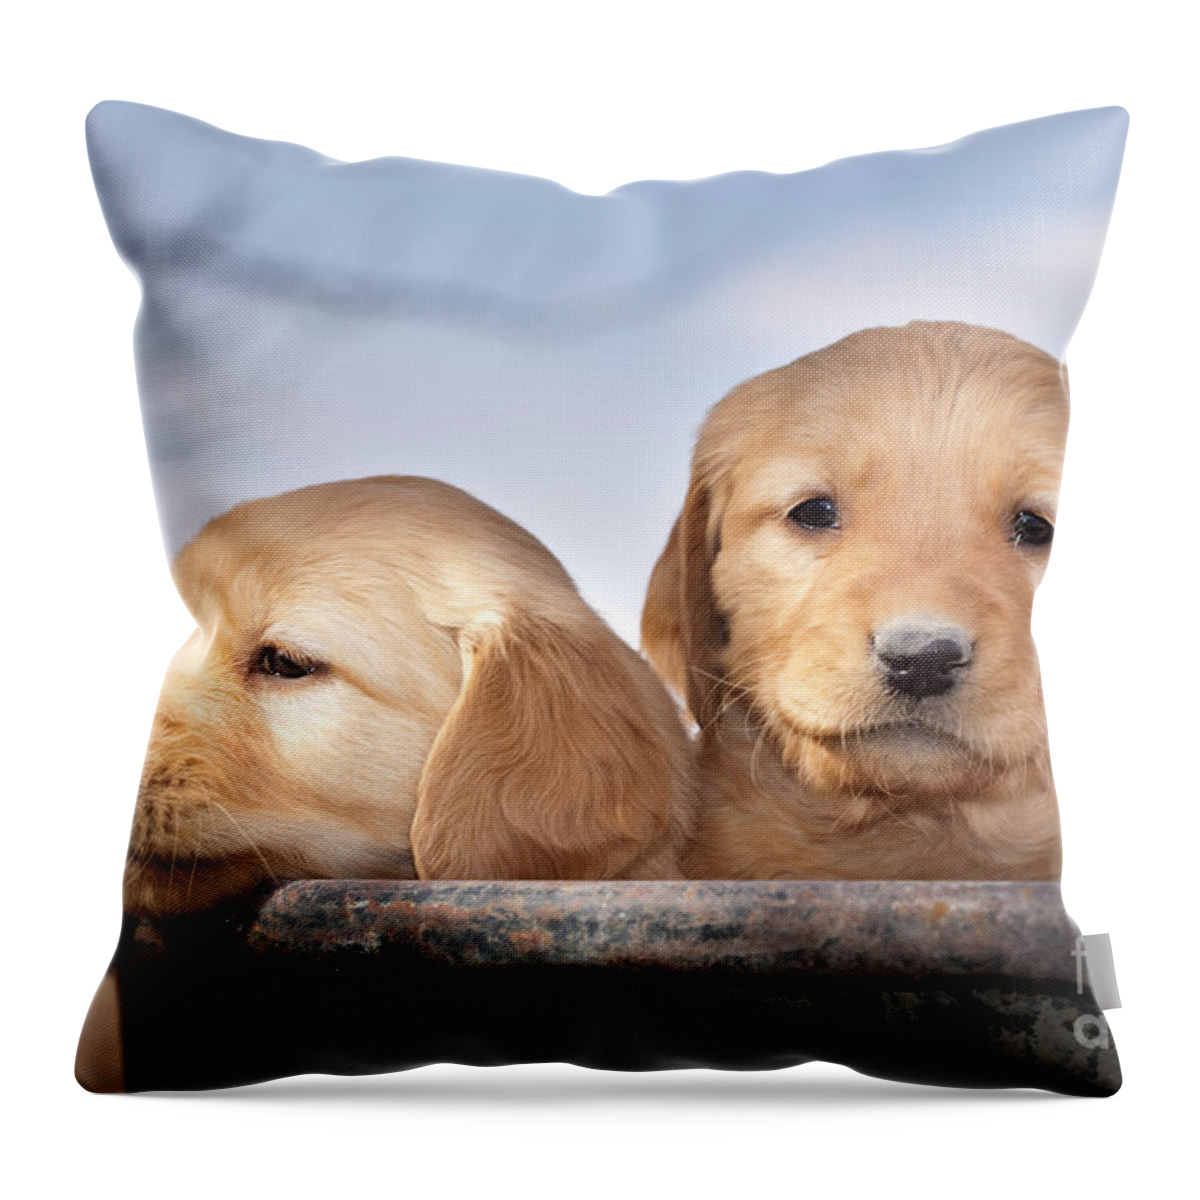 Dogs Throw Pillow featuring the photograph Golden Puppies by Cindy Singleton